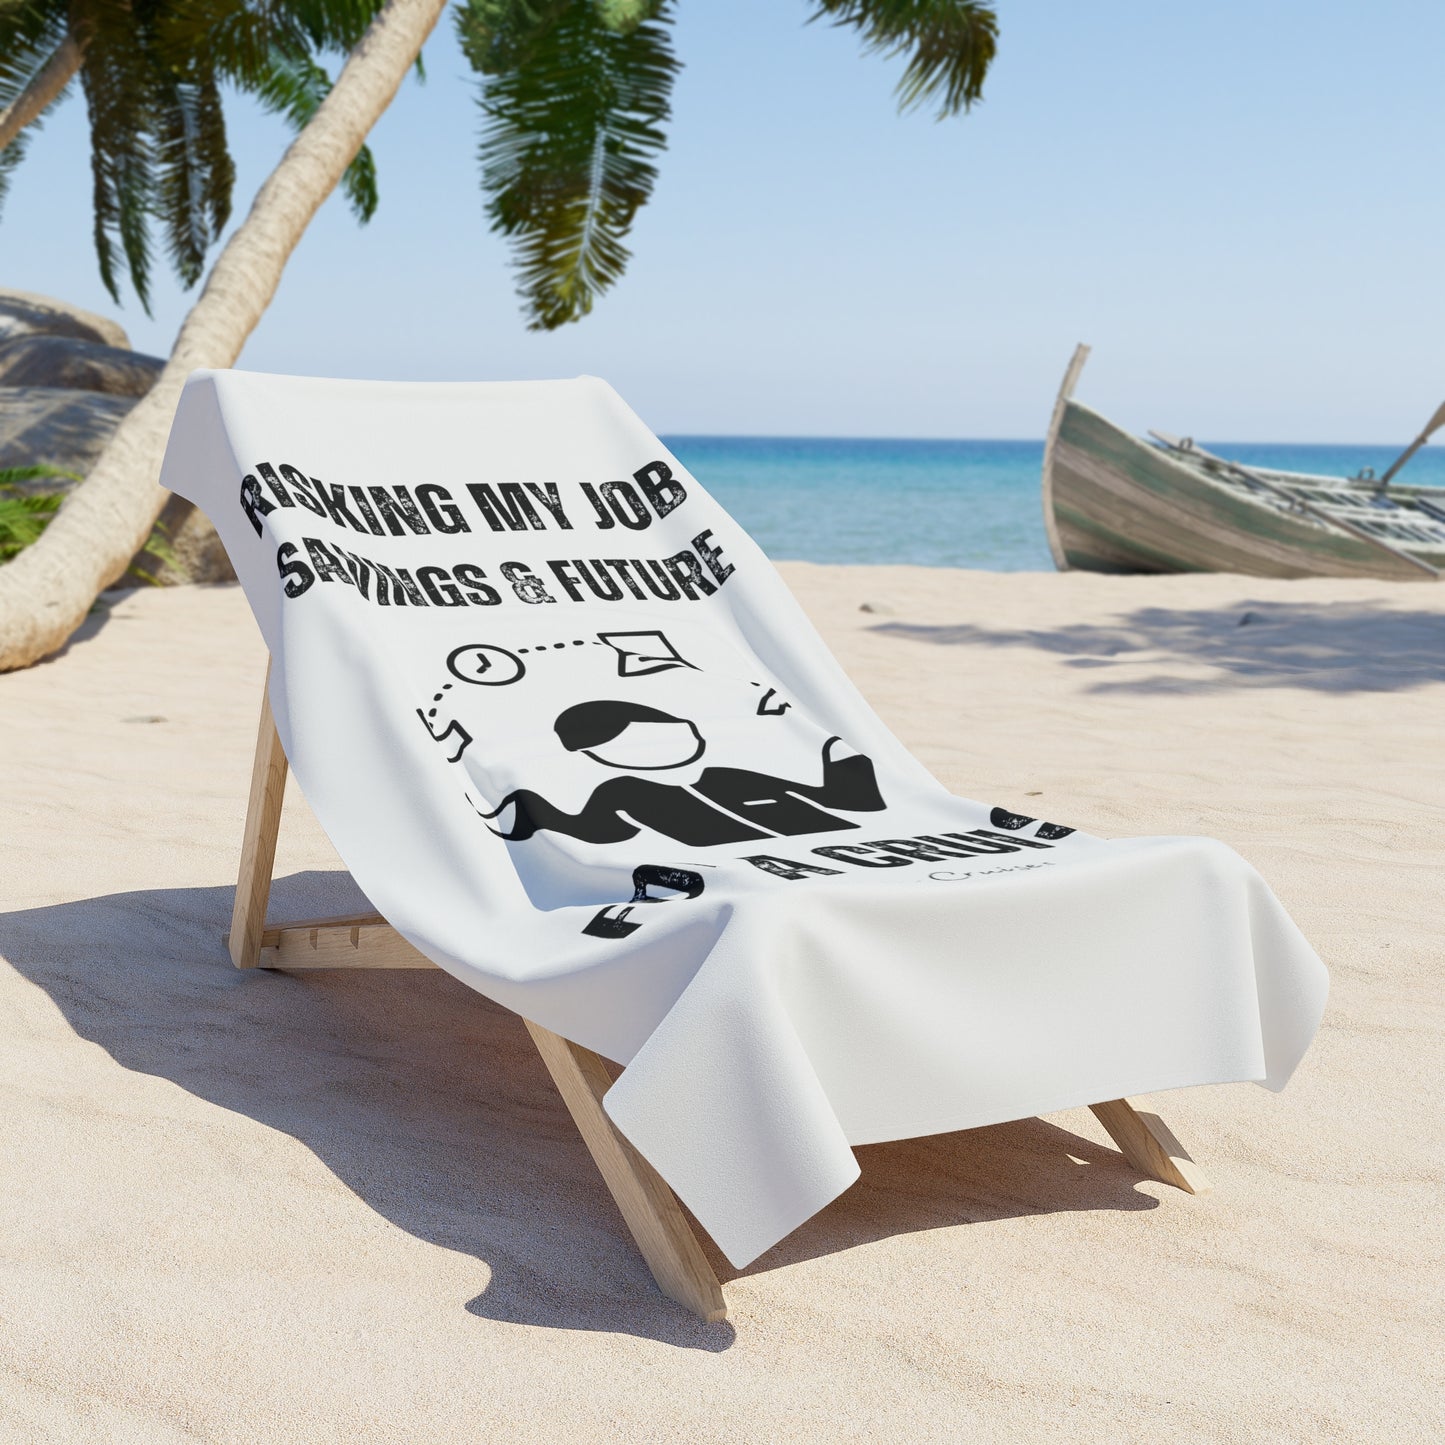 Risking Everything for a Cruise - Beach Towel